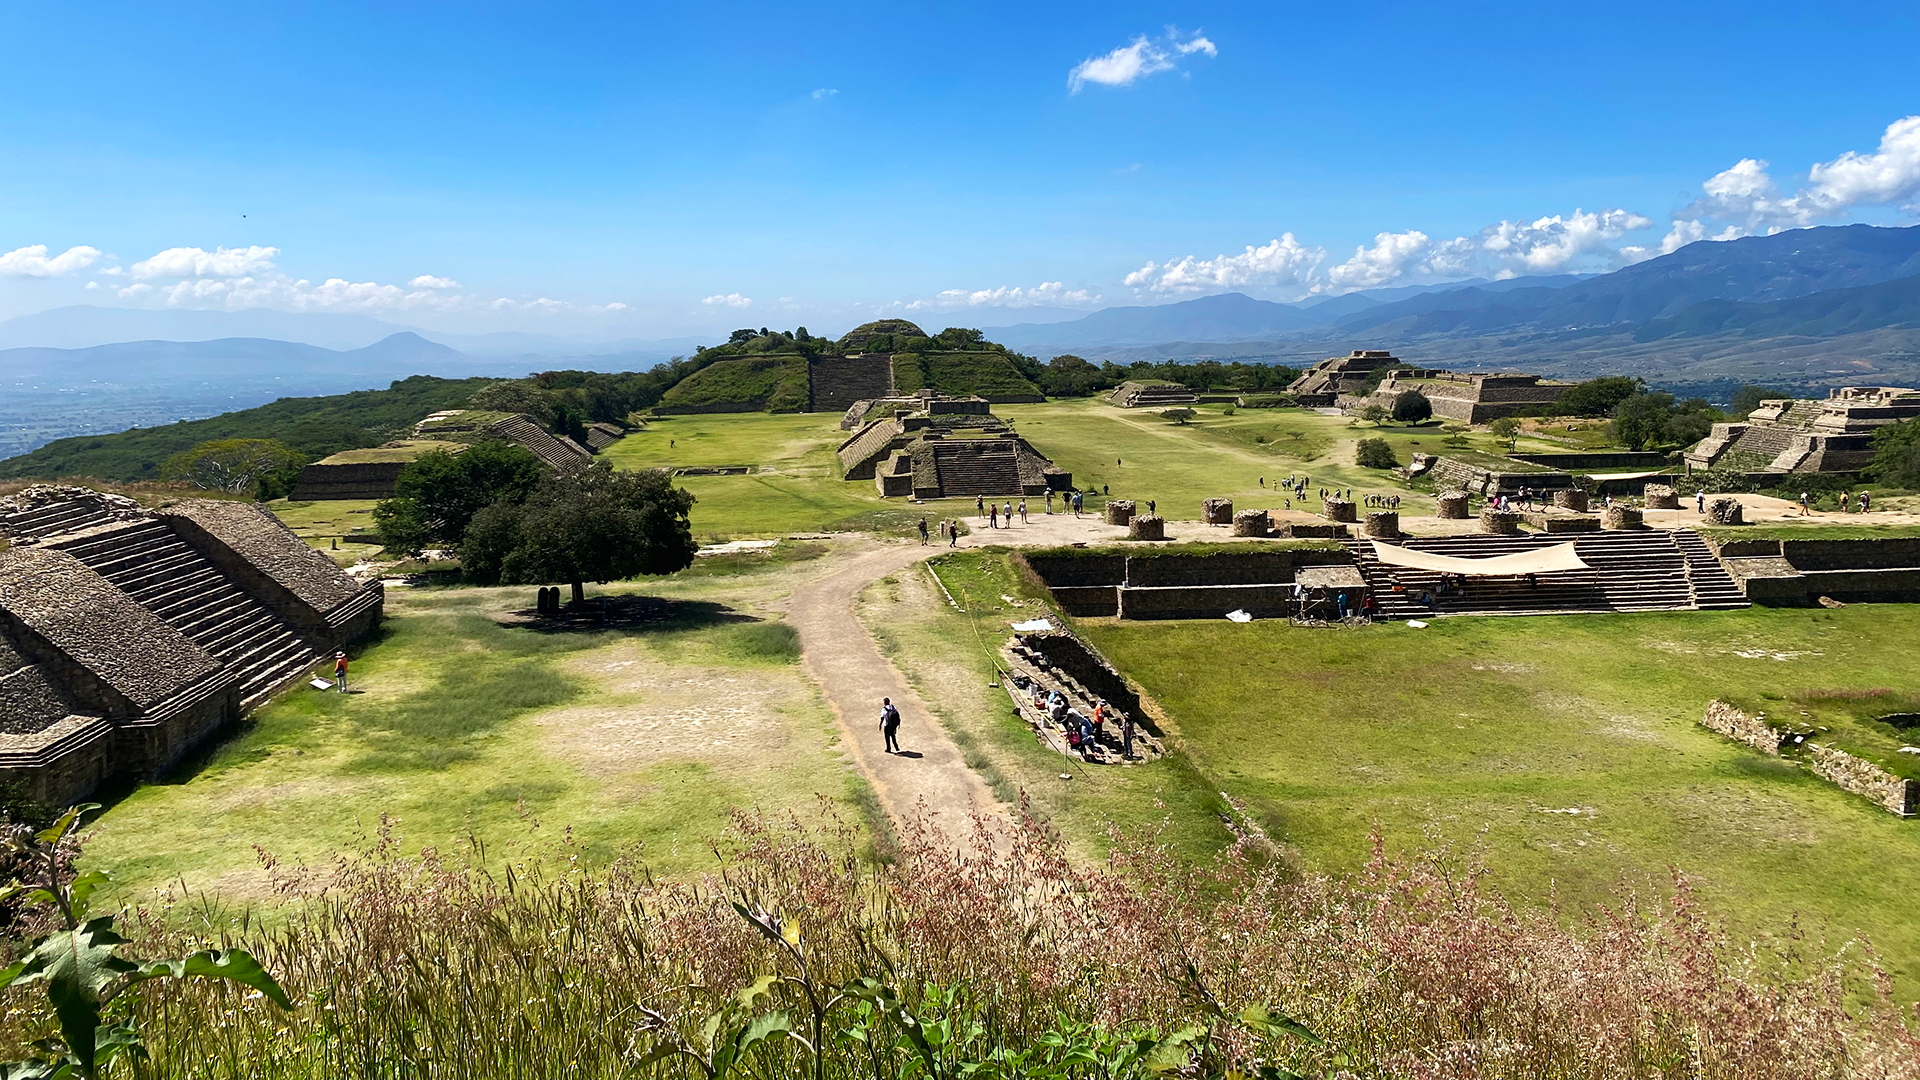 Photo of the Monte Alban archaeological site in Mexico